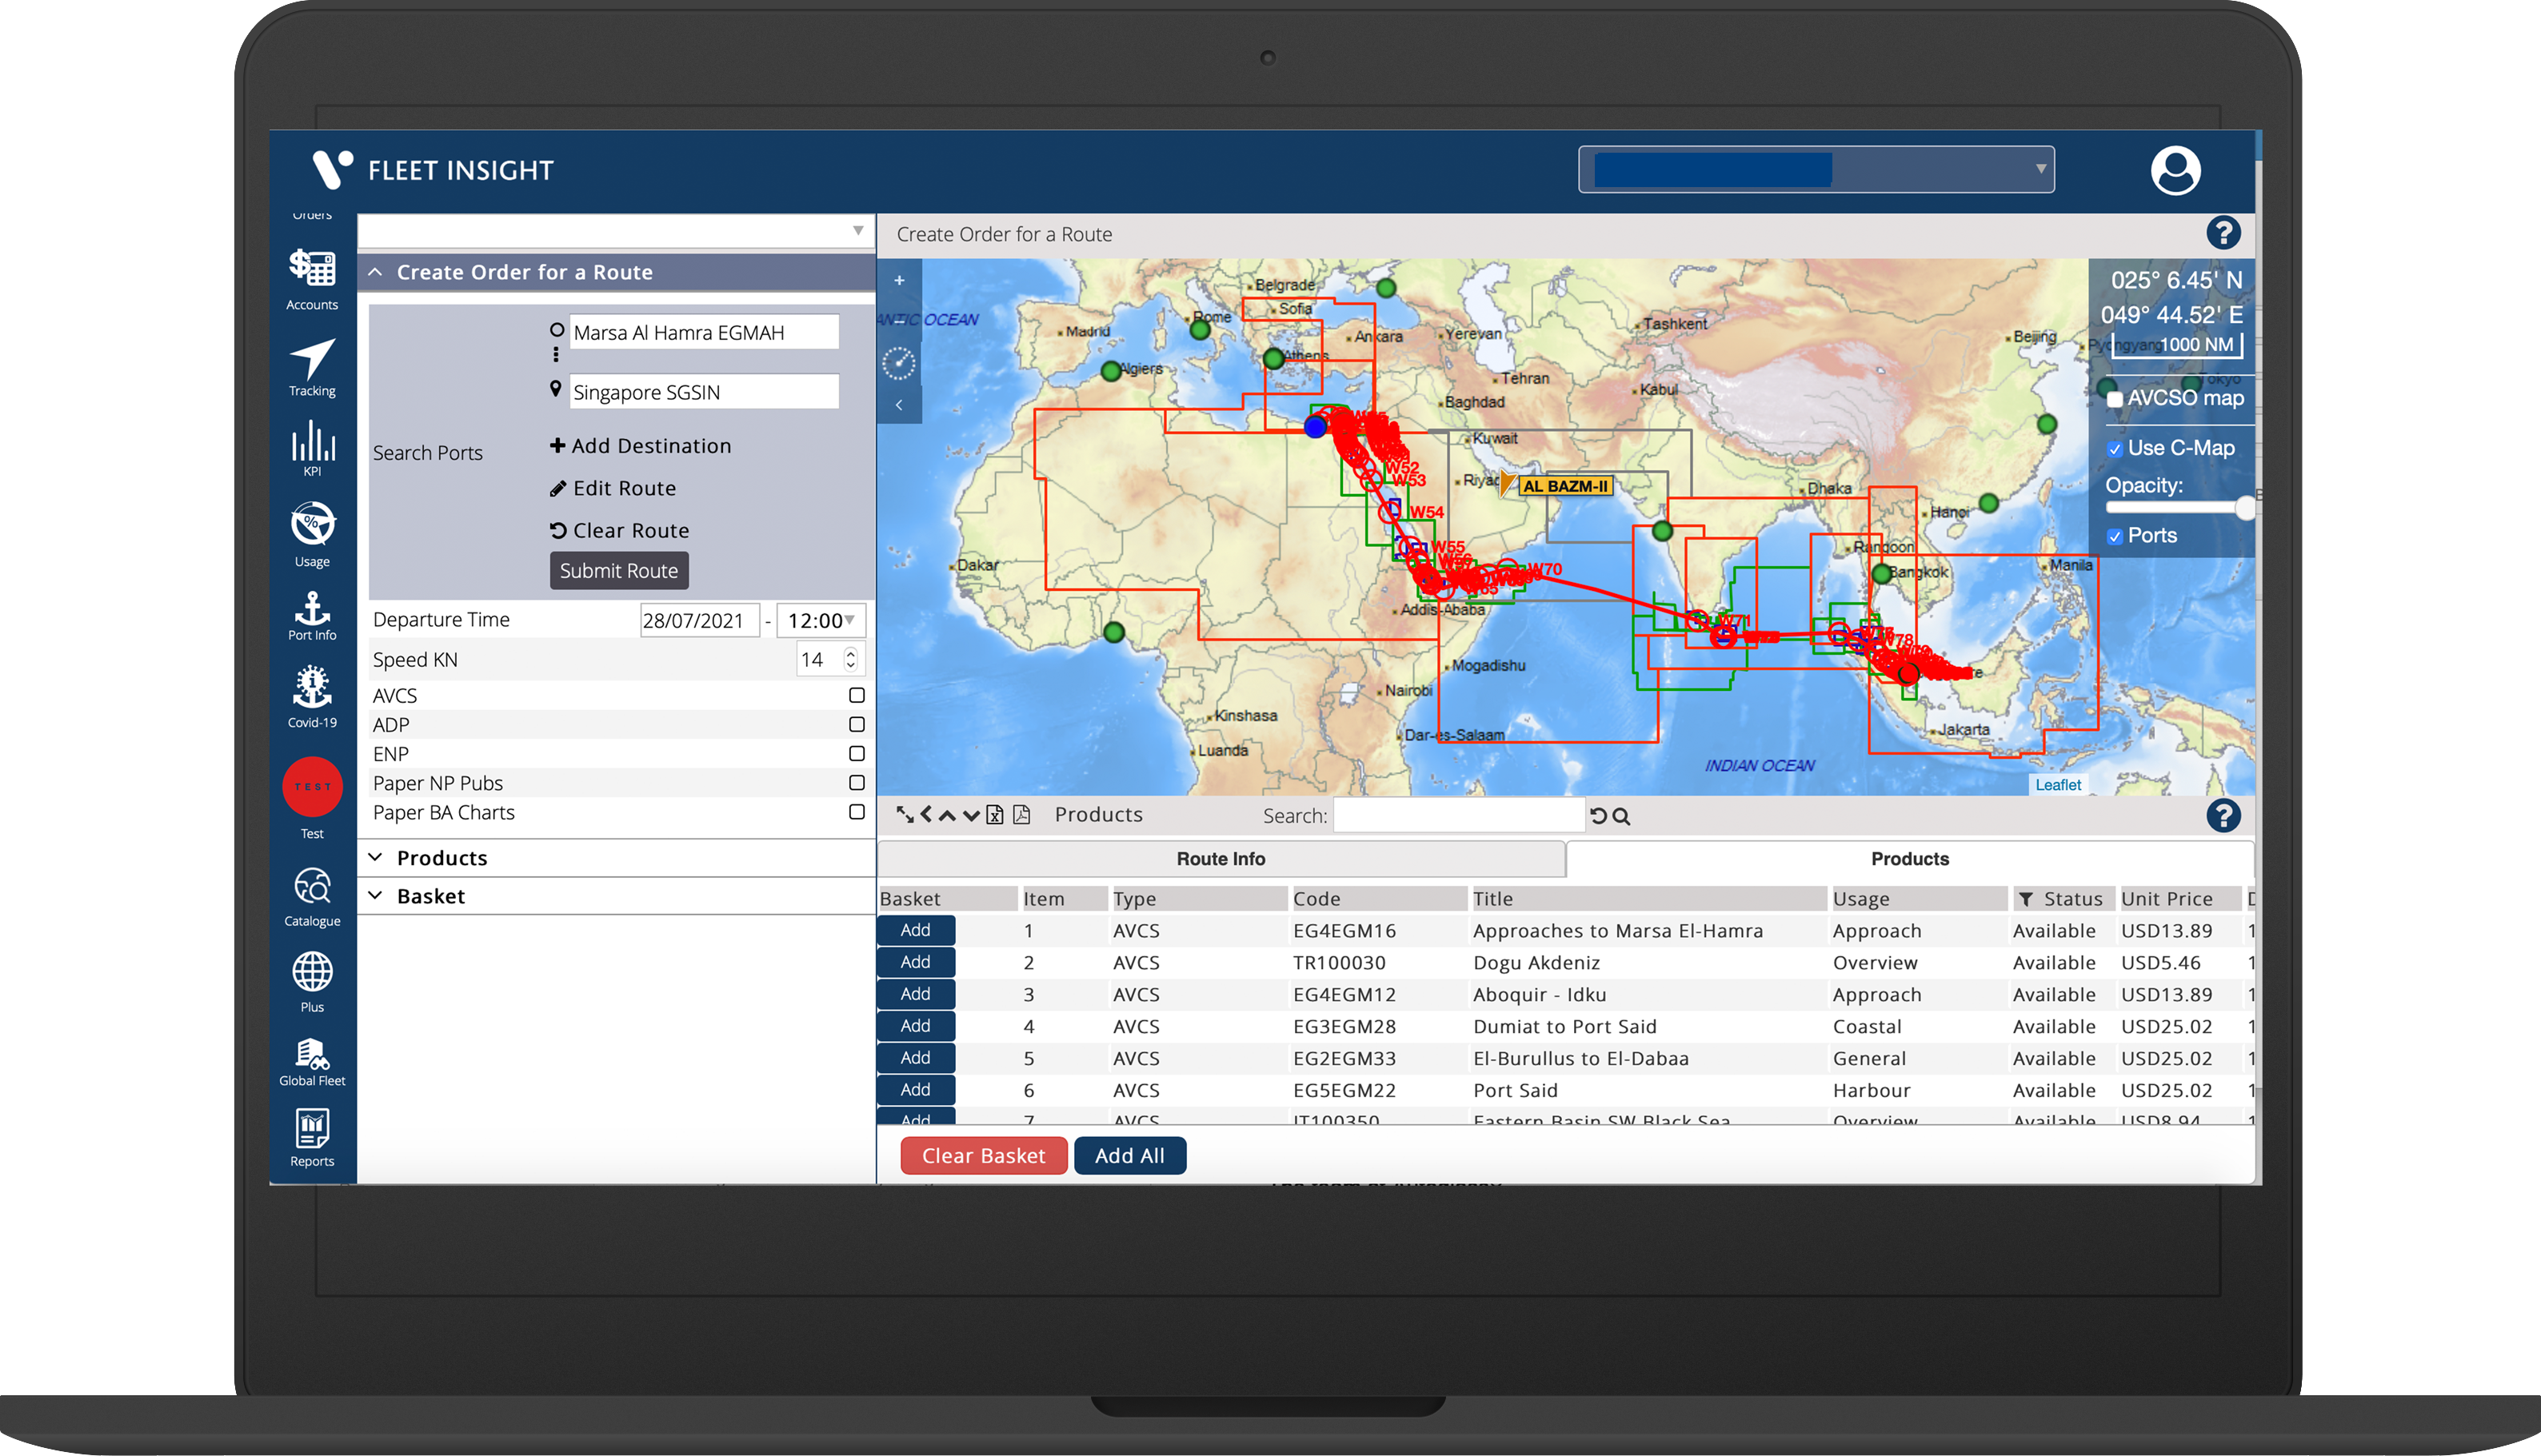 Voyager Worldwide enables you to purchase navigation supplies directly from the office using Voyager Fleet Insight